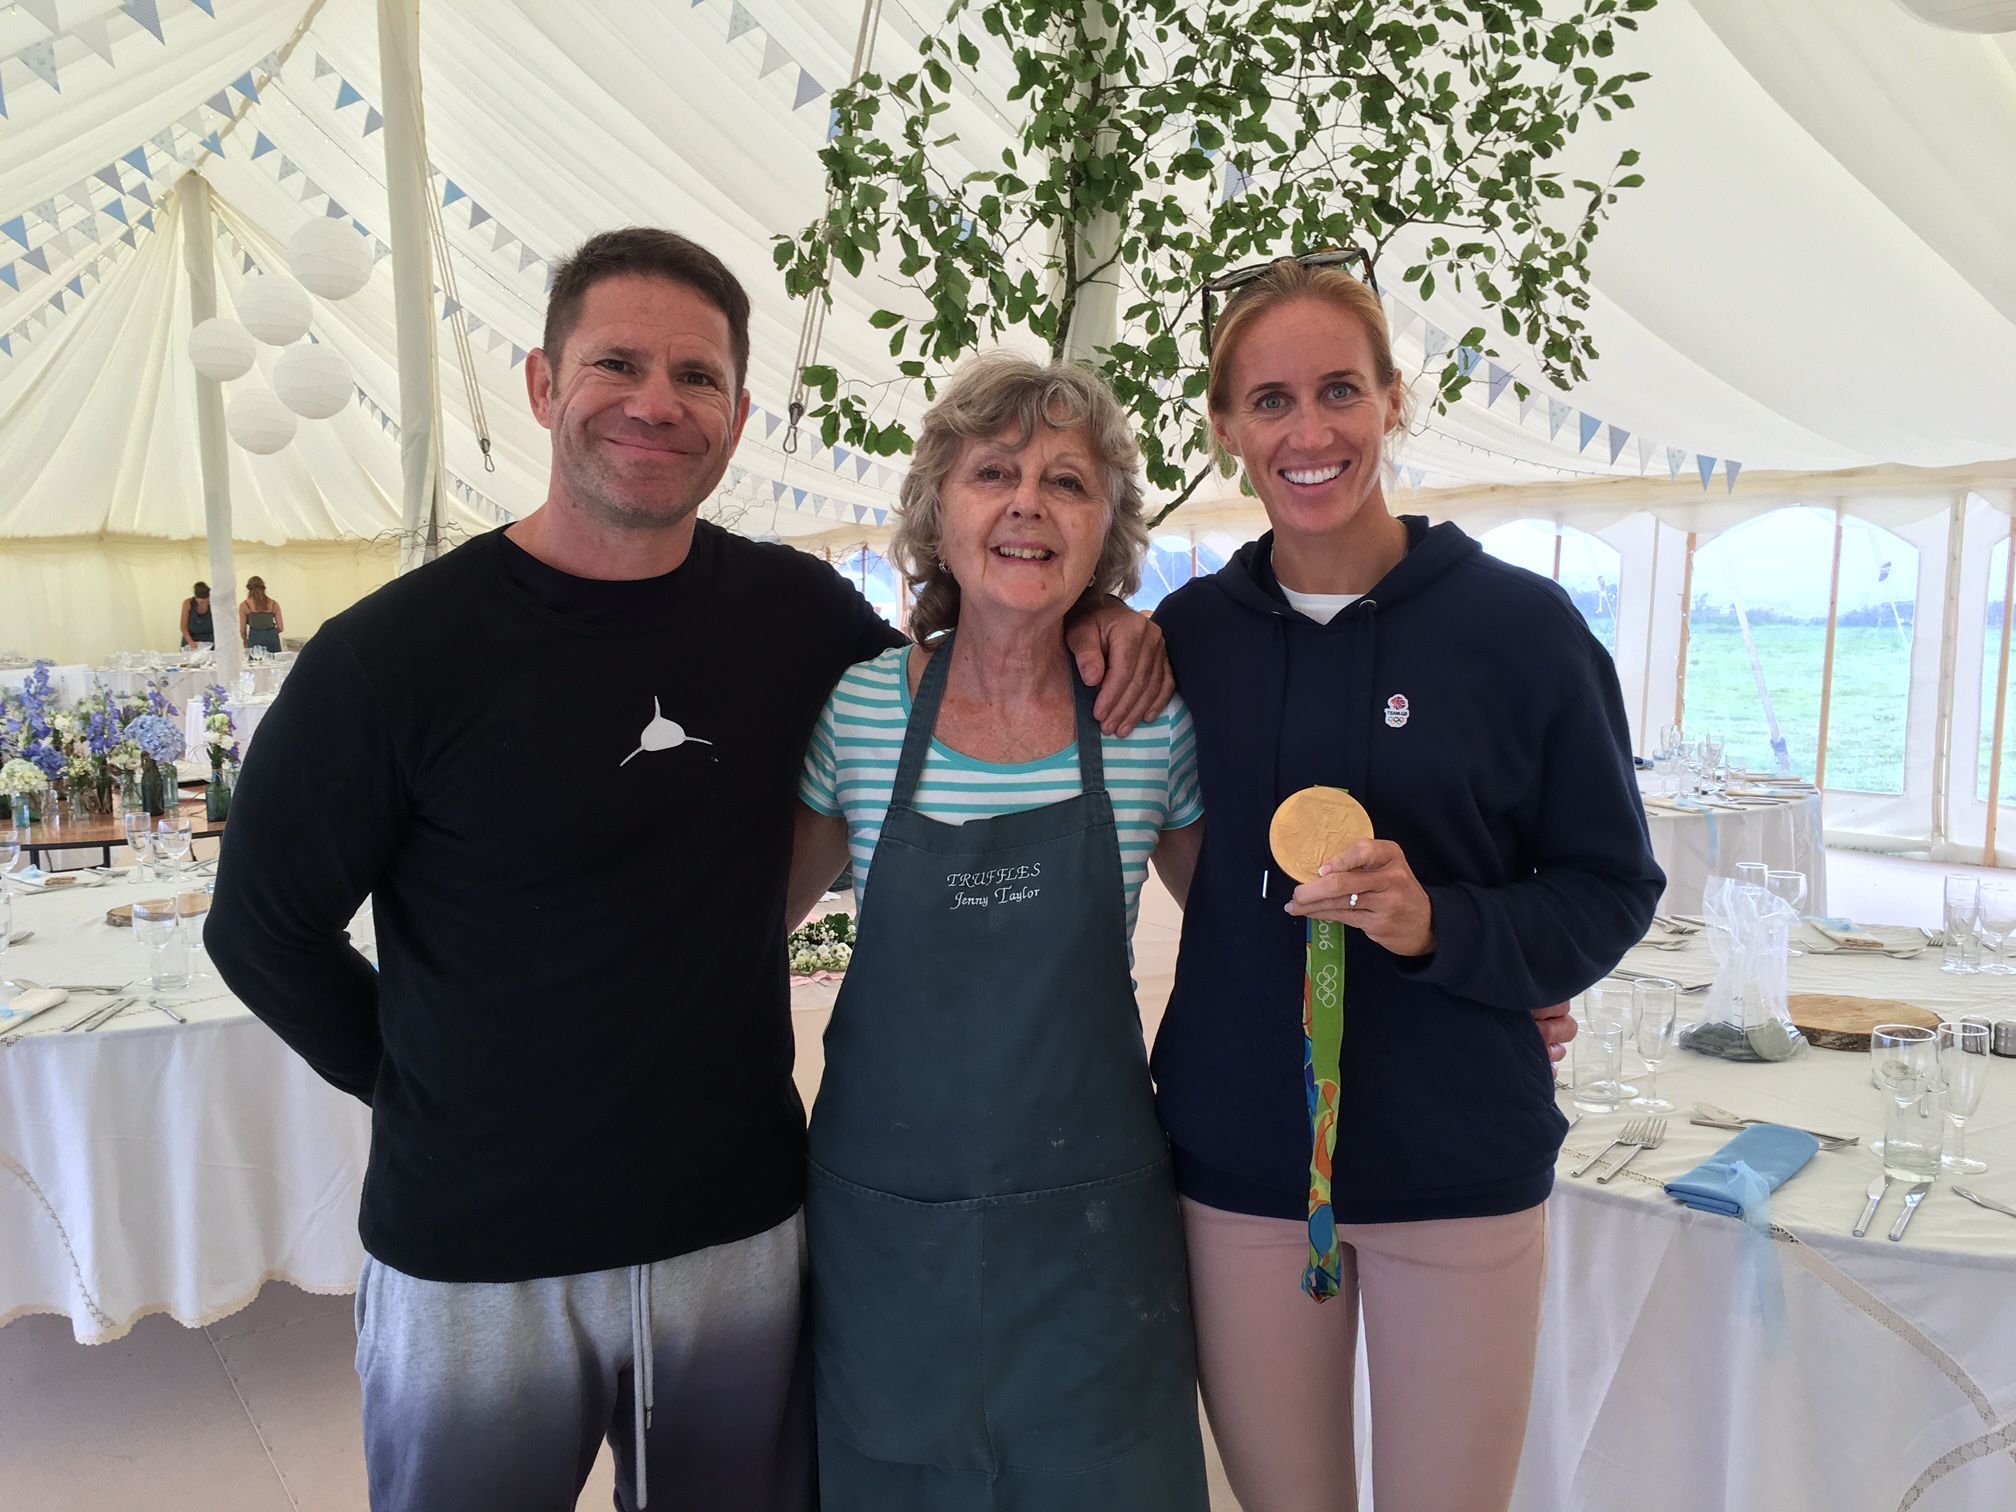 Mylor Company Caters For Star Studded Penzance Wedding Of Double Olympic Gold Medallist Helen Glover And Tv S Steve Backshall With Celebrity Guests Including Eastenders Jake Wood Sunetra Sarker From Strictly Come Dancing